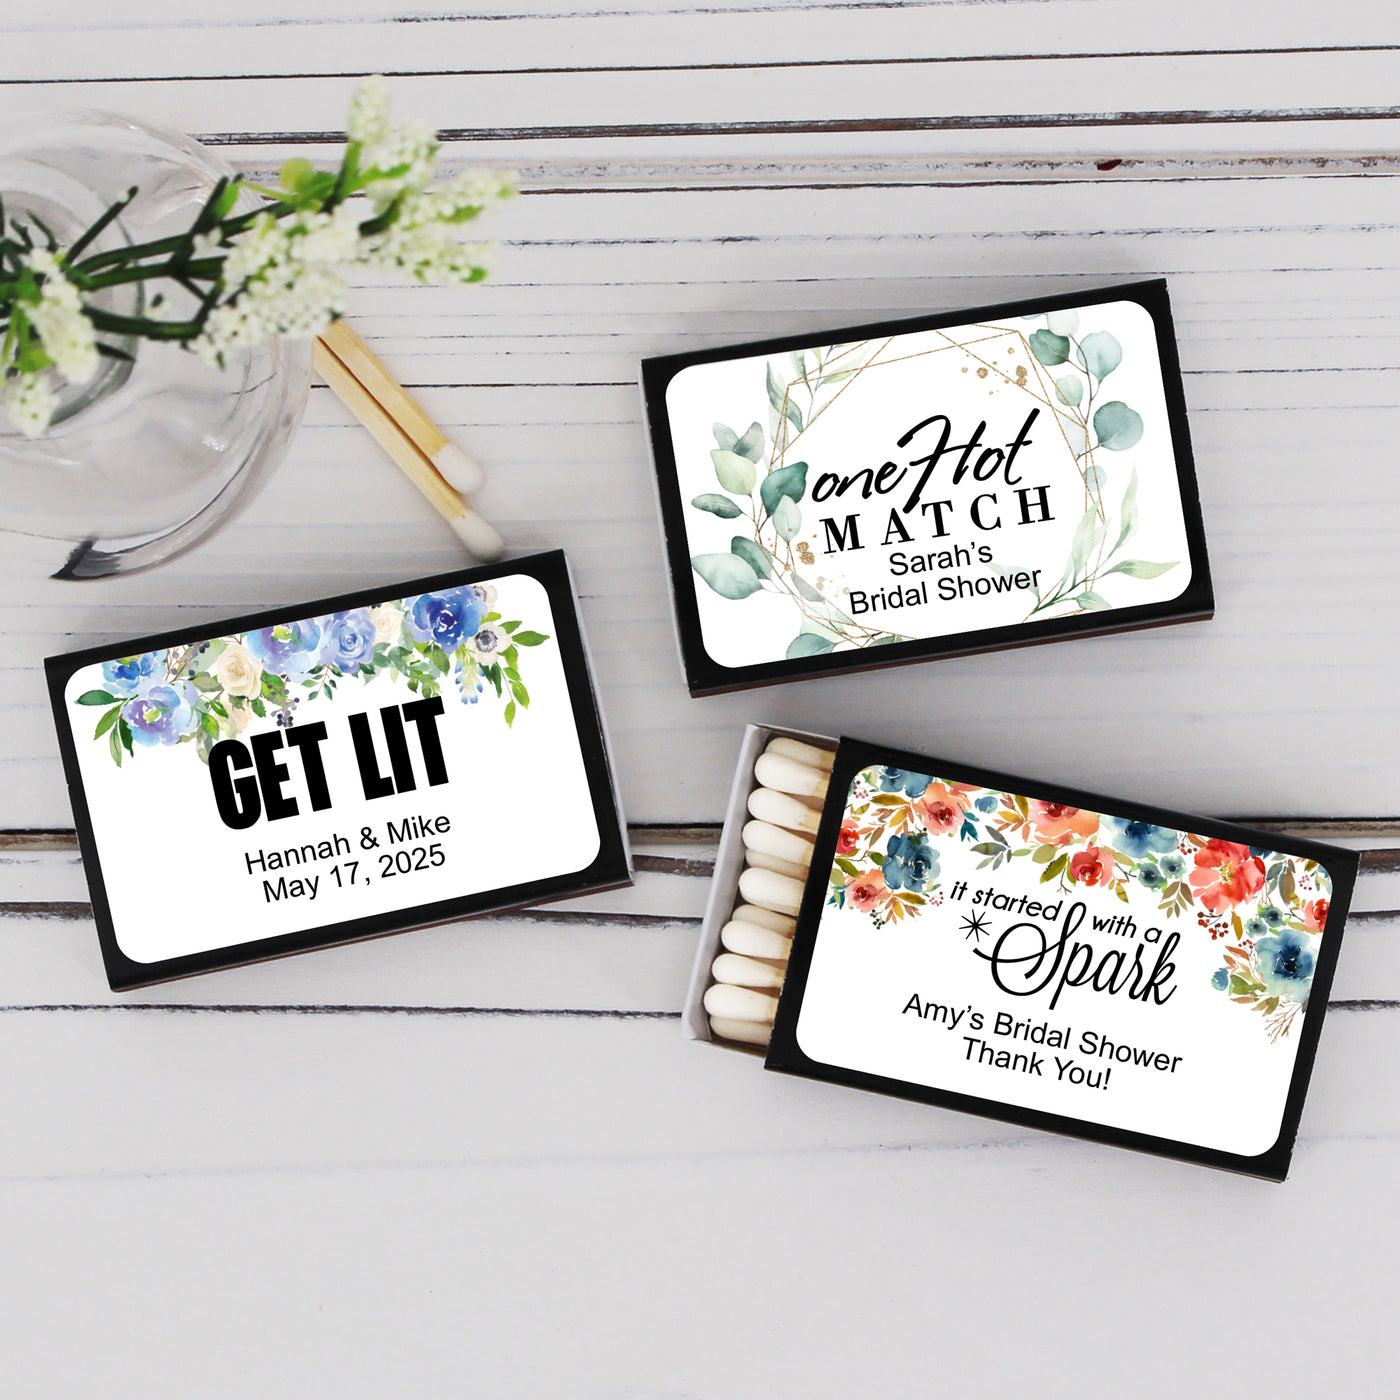 Floral & Botanicals Personalized Matches - Set of 50